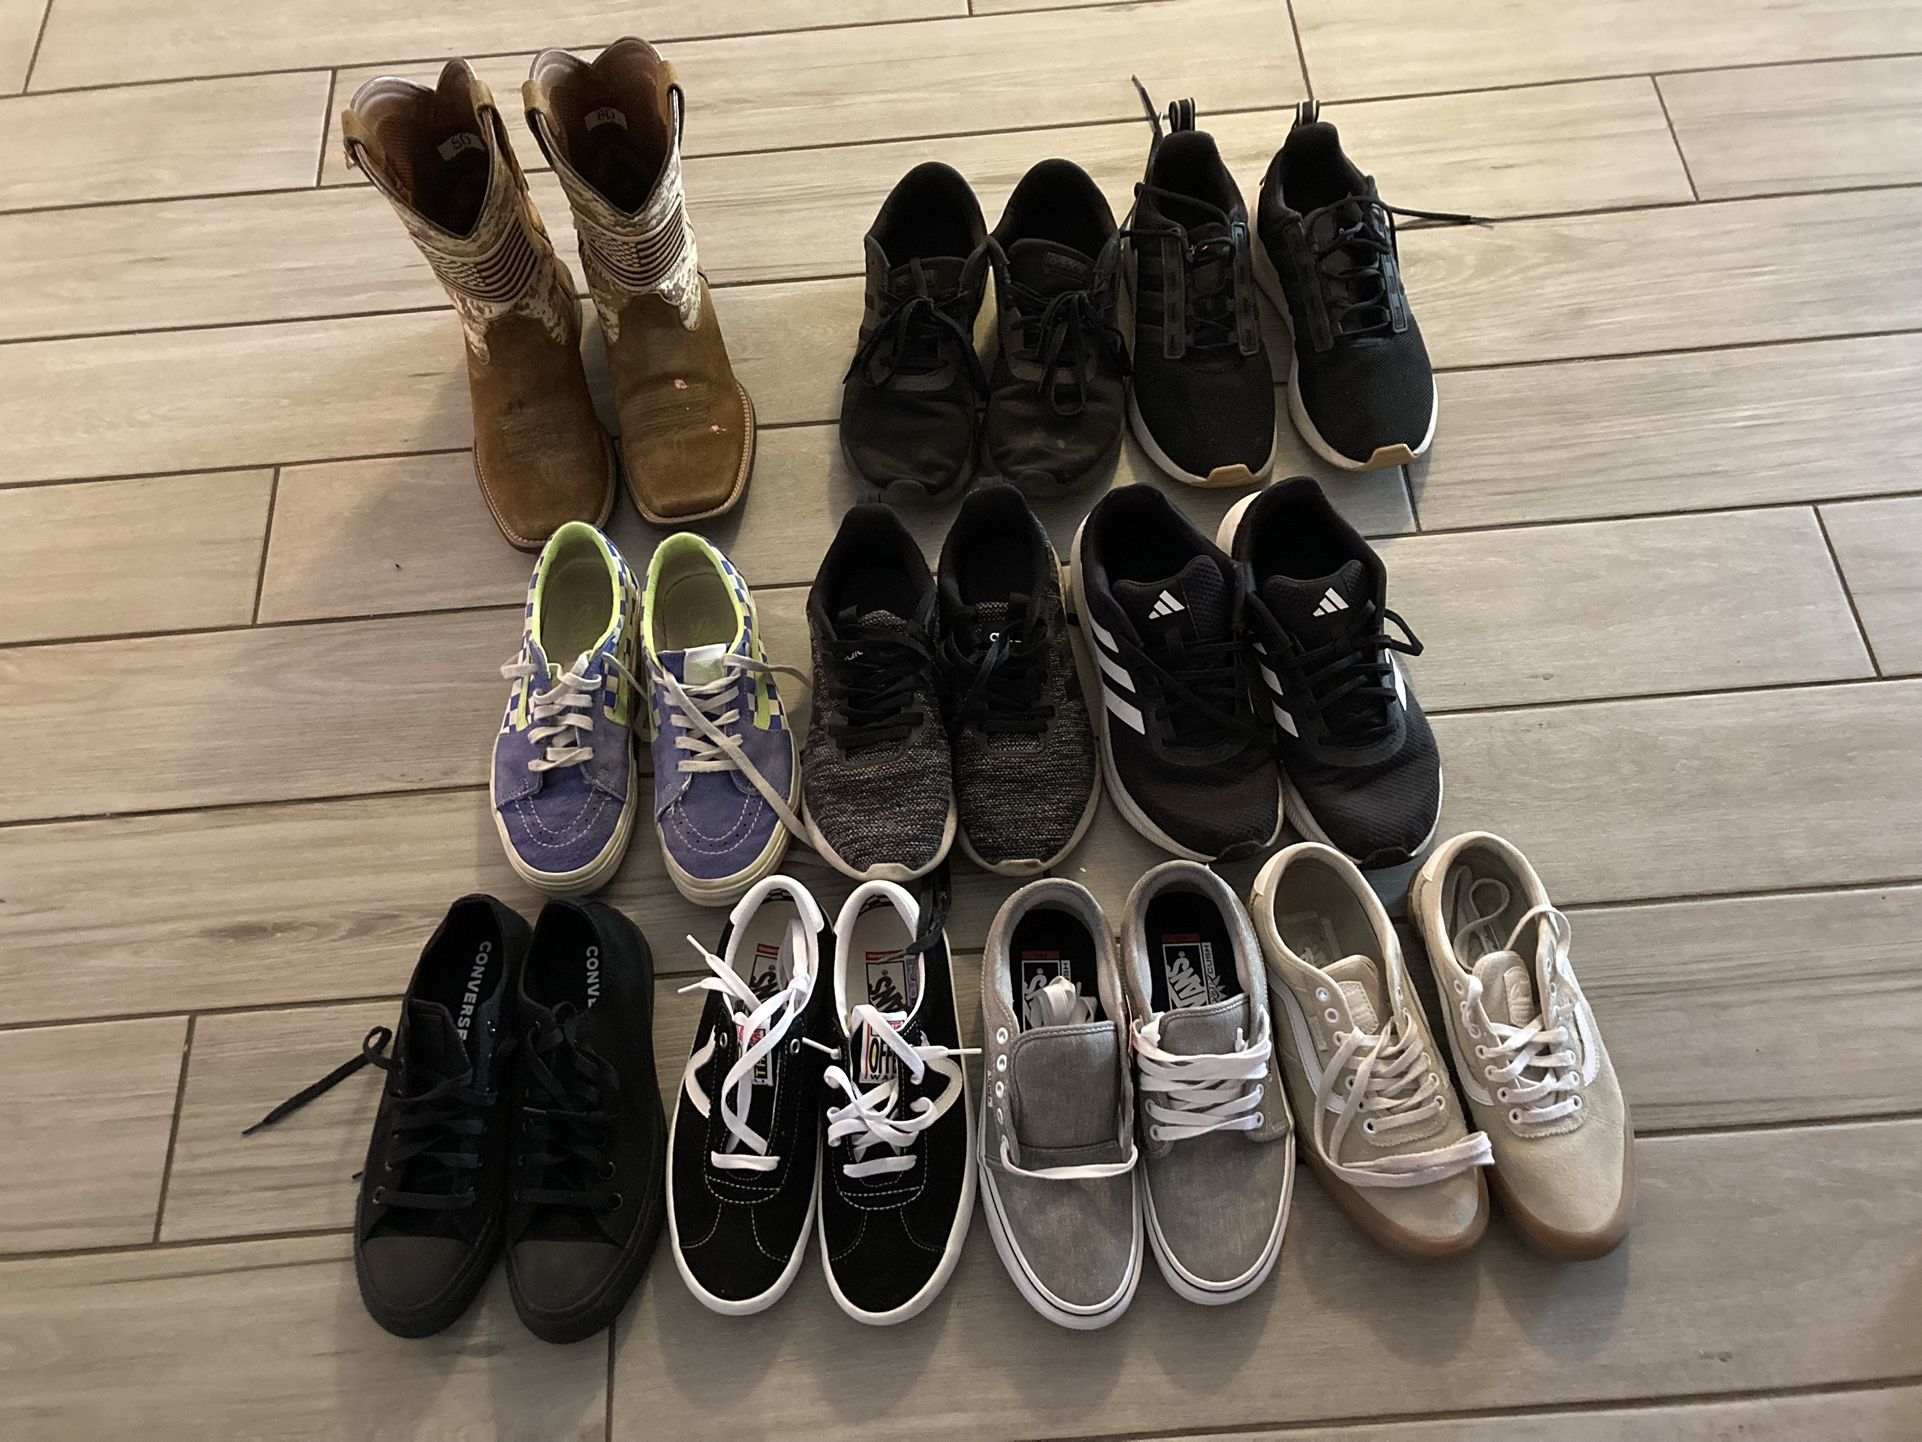 Men’s Converse, Vans, Adidas Shoes And ARIAT Boots